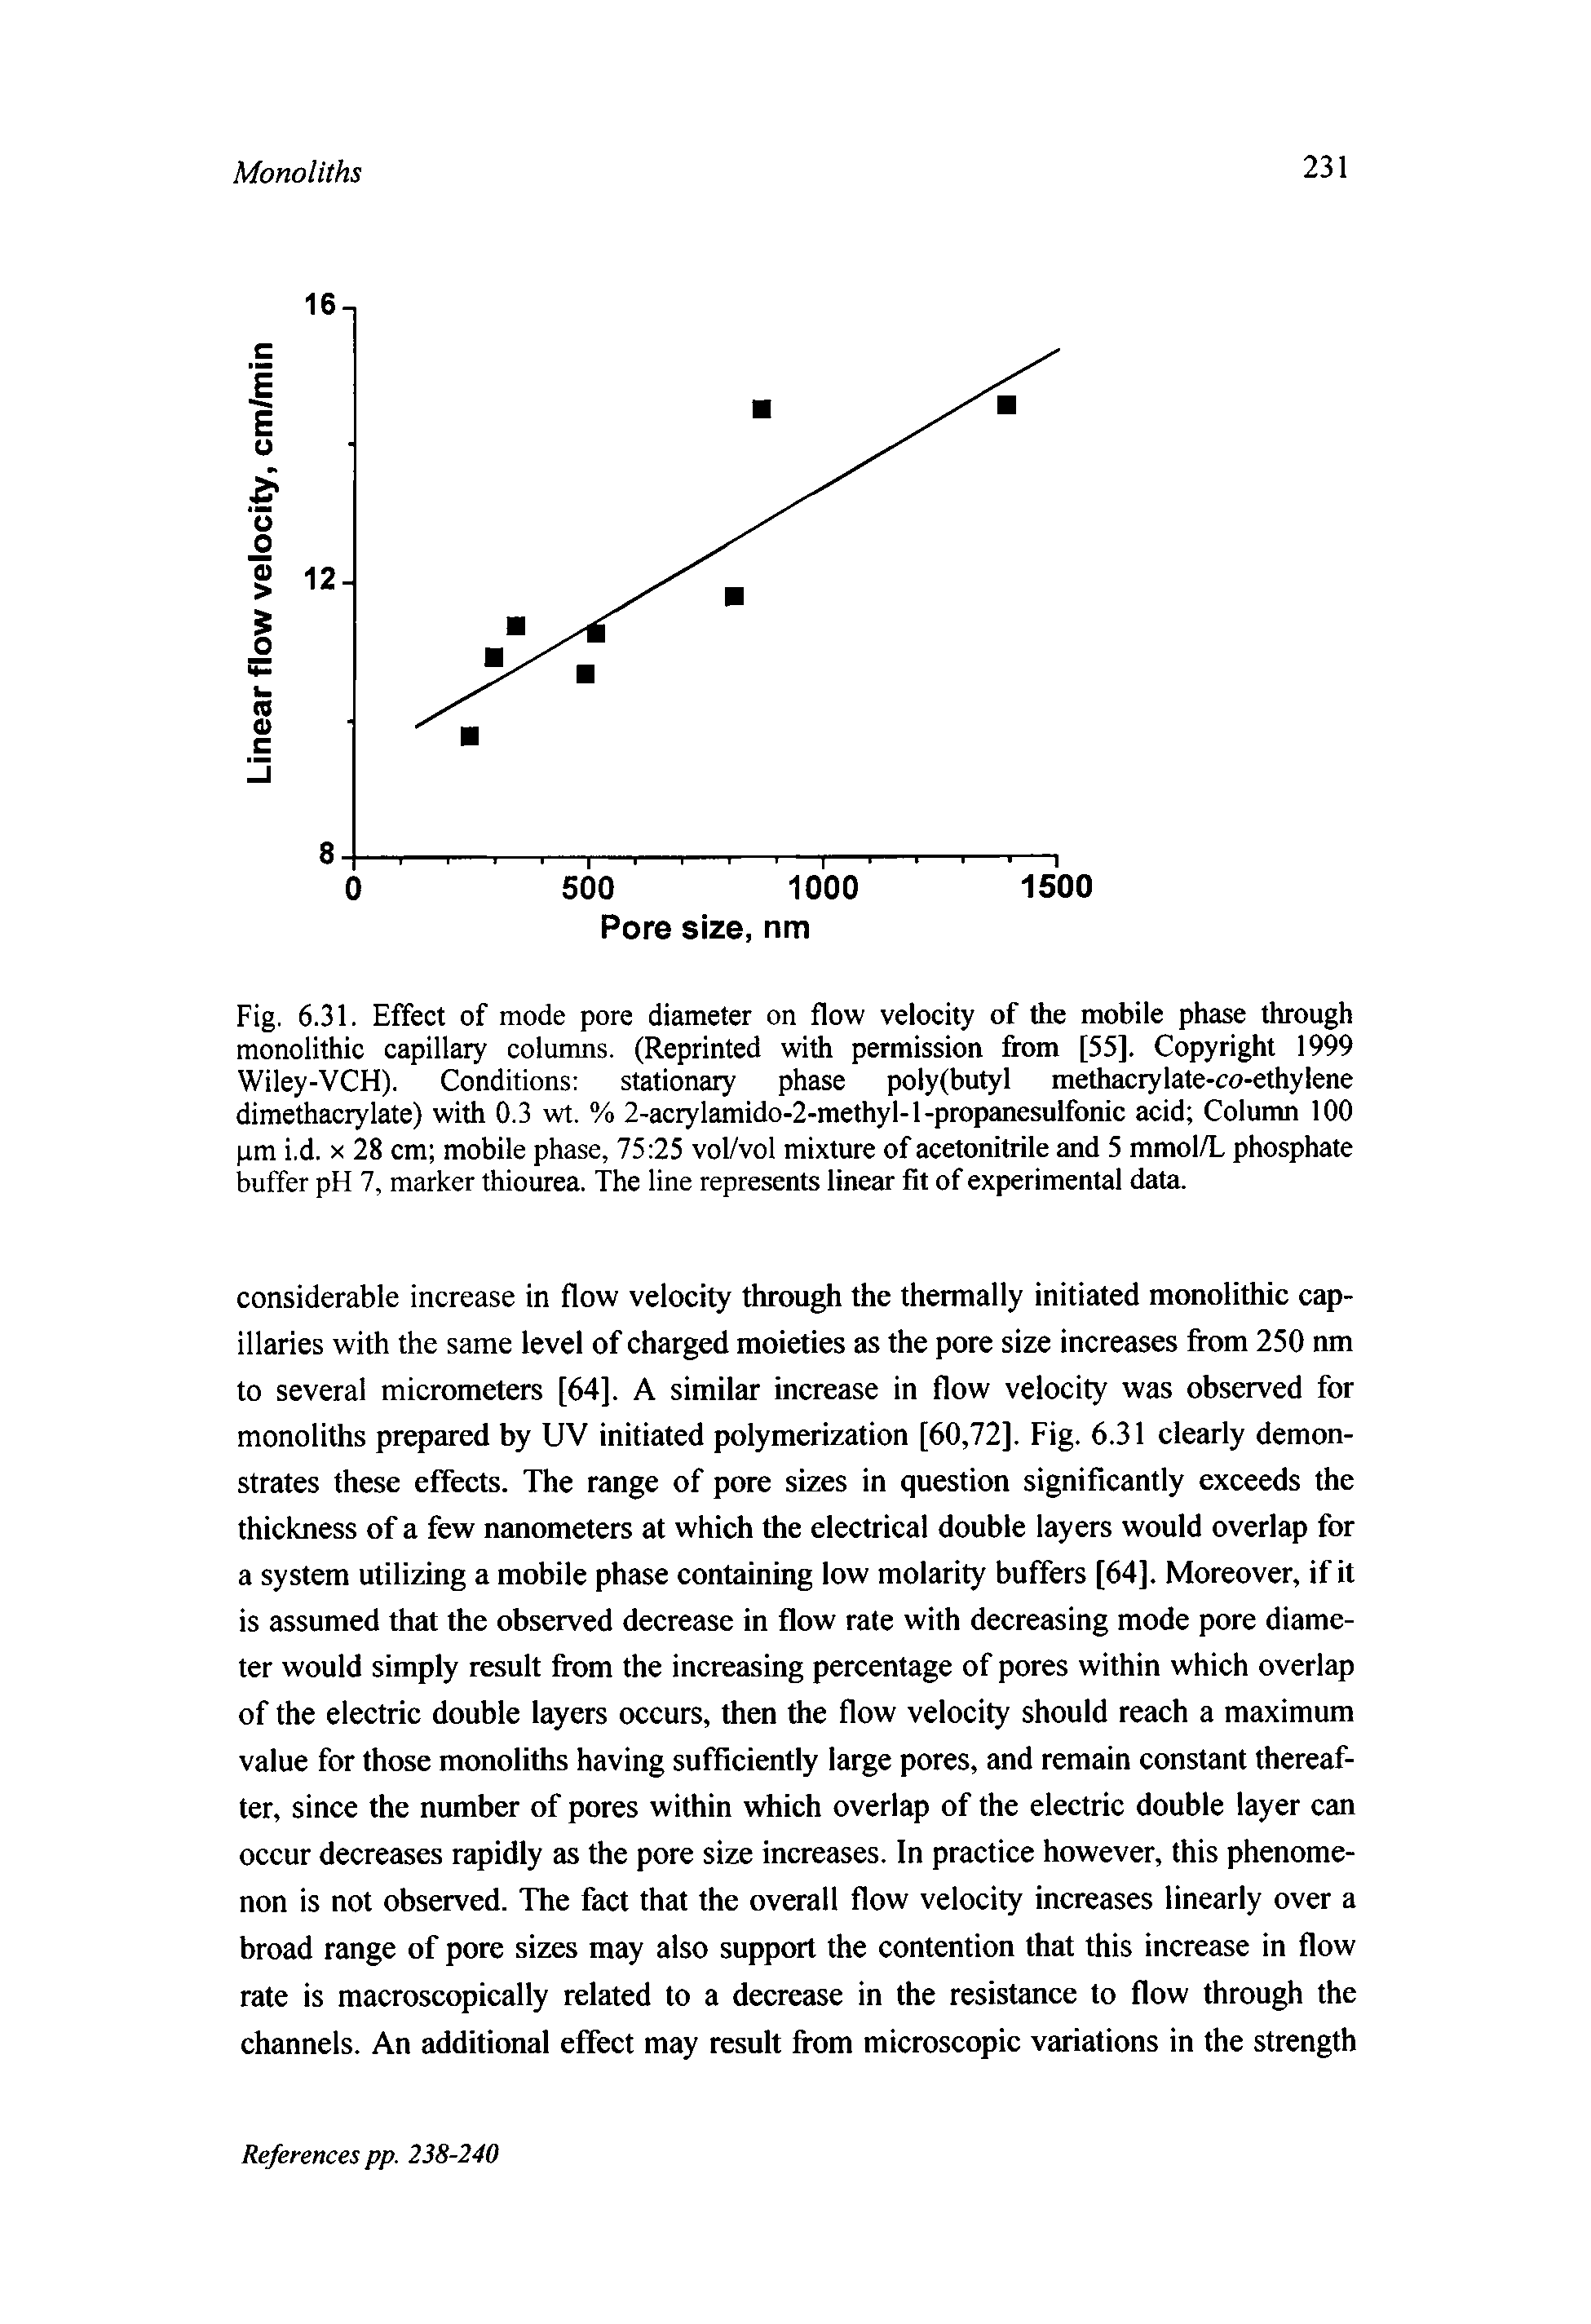 Fig. 6.31. Effect of mode pore diameter on flow velocity of the mobile phase through monolithic capillary columns. (Reprinted with permission from [55], Copyright 1999 Wiley-VCH). Conditions stationary phase poly(butyl methacrylate-co-ethylene dimethacrylate) with 0.3 wt. % 2-acrylamido-2-methyl-l-propanesulfonic acid Column 100 pm i.d. x 28 cm mobile phase, 75 25 vol/vol mixture of acetonitrile and 5 mmol/L phosphate buffer pH 7, marker thiourea. The line represents linear fit of experimental data.